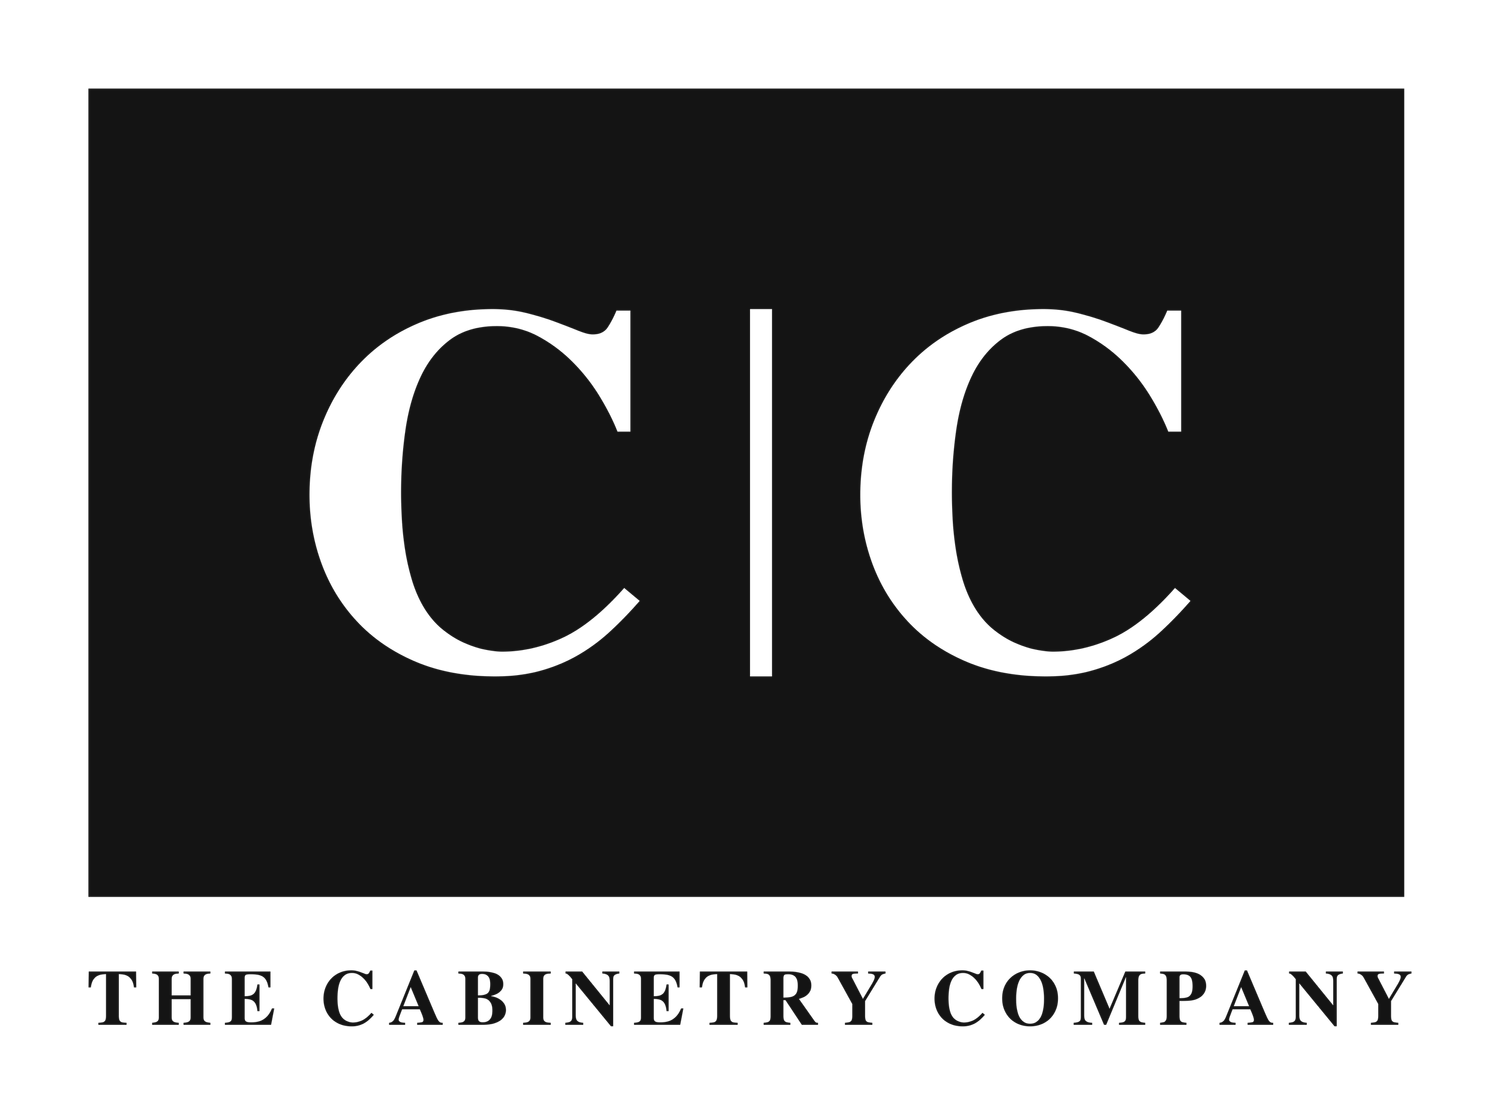 The Cabinetry Company